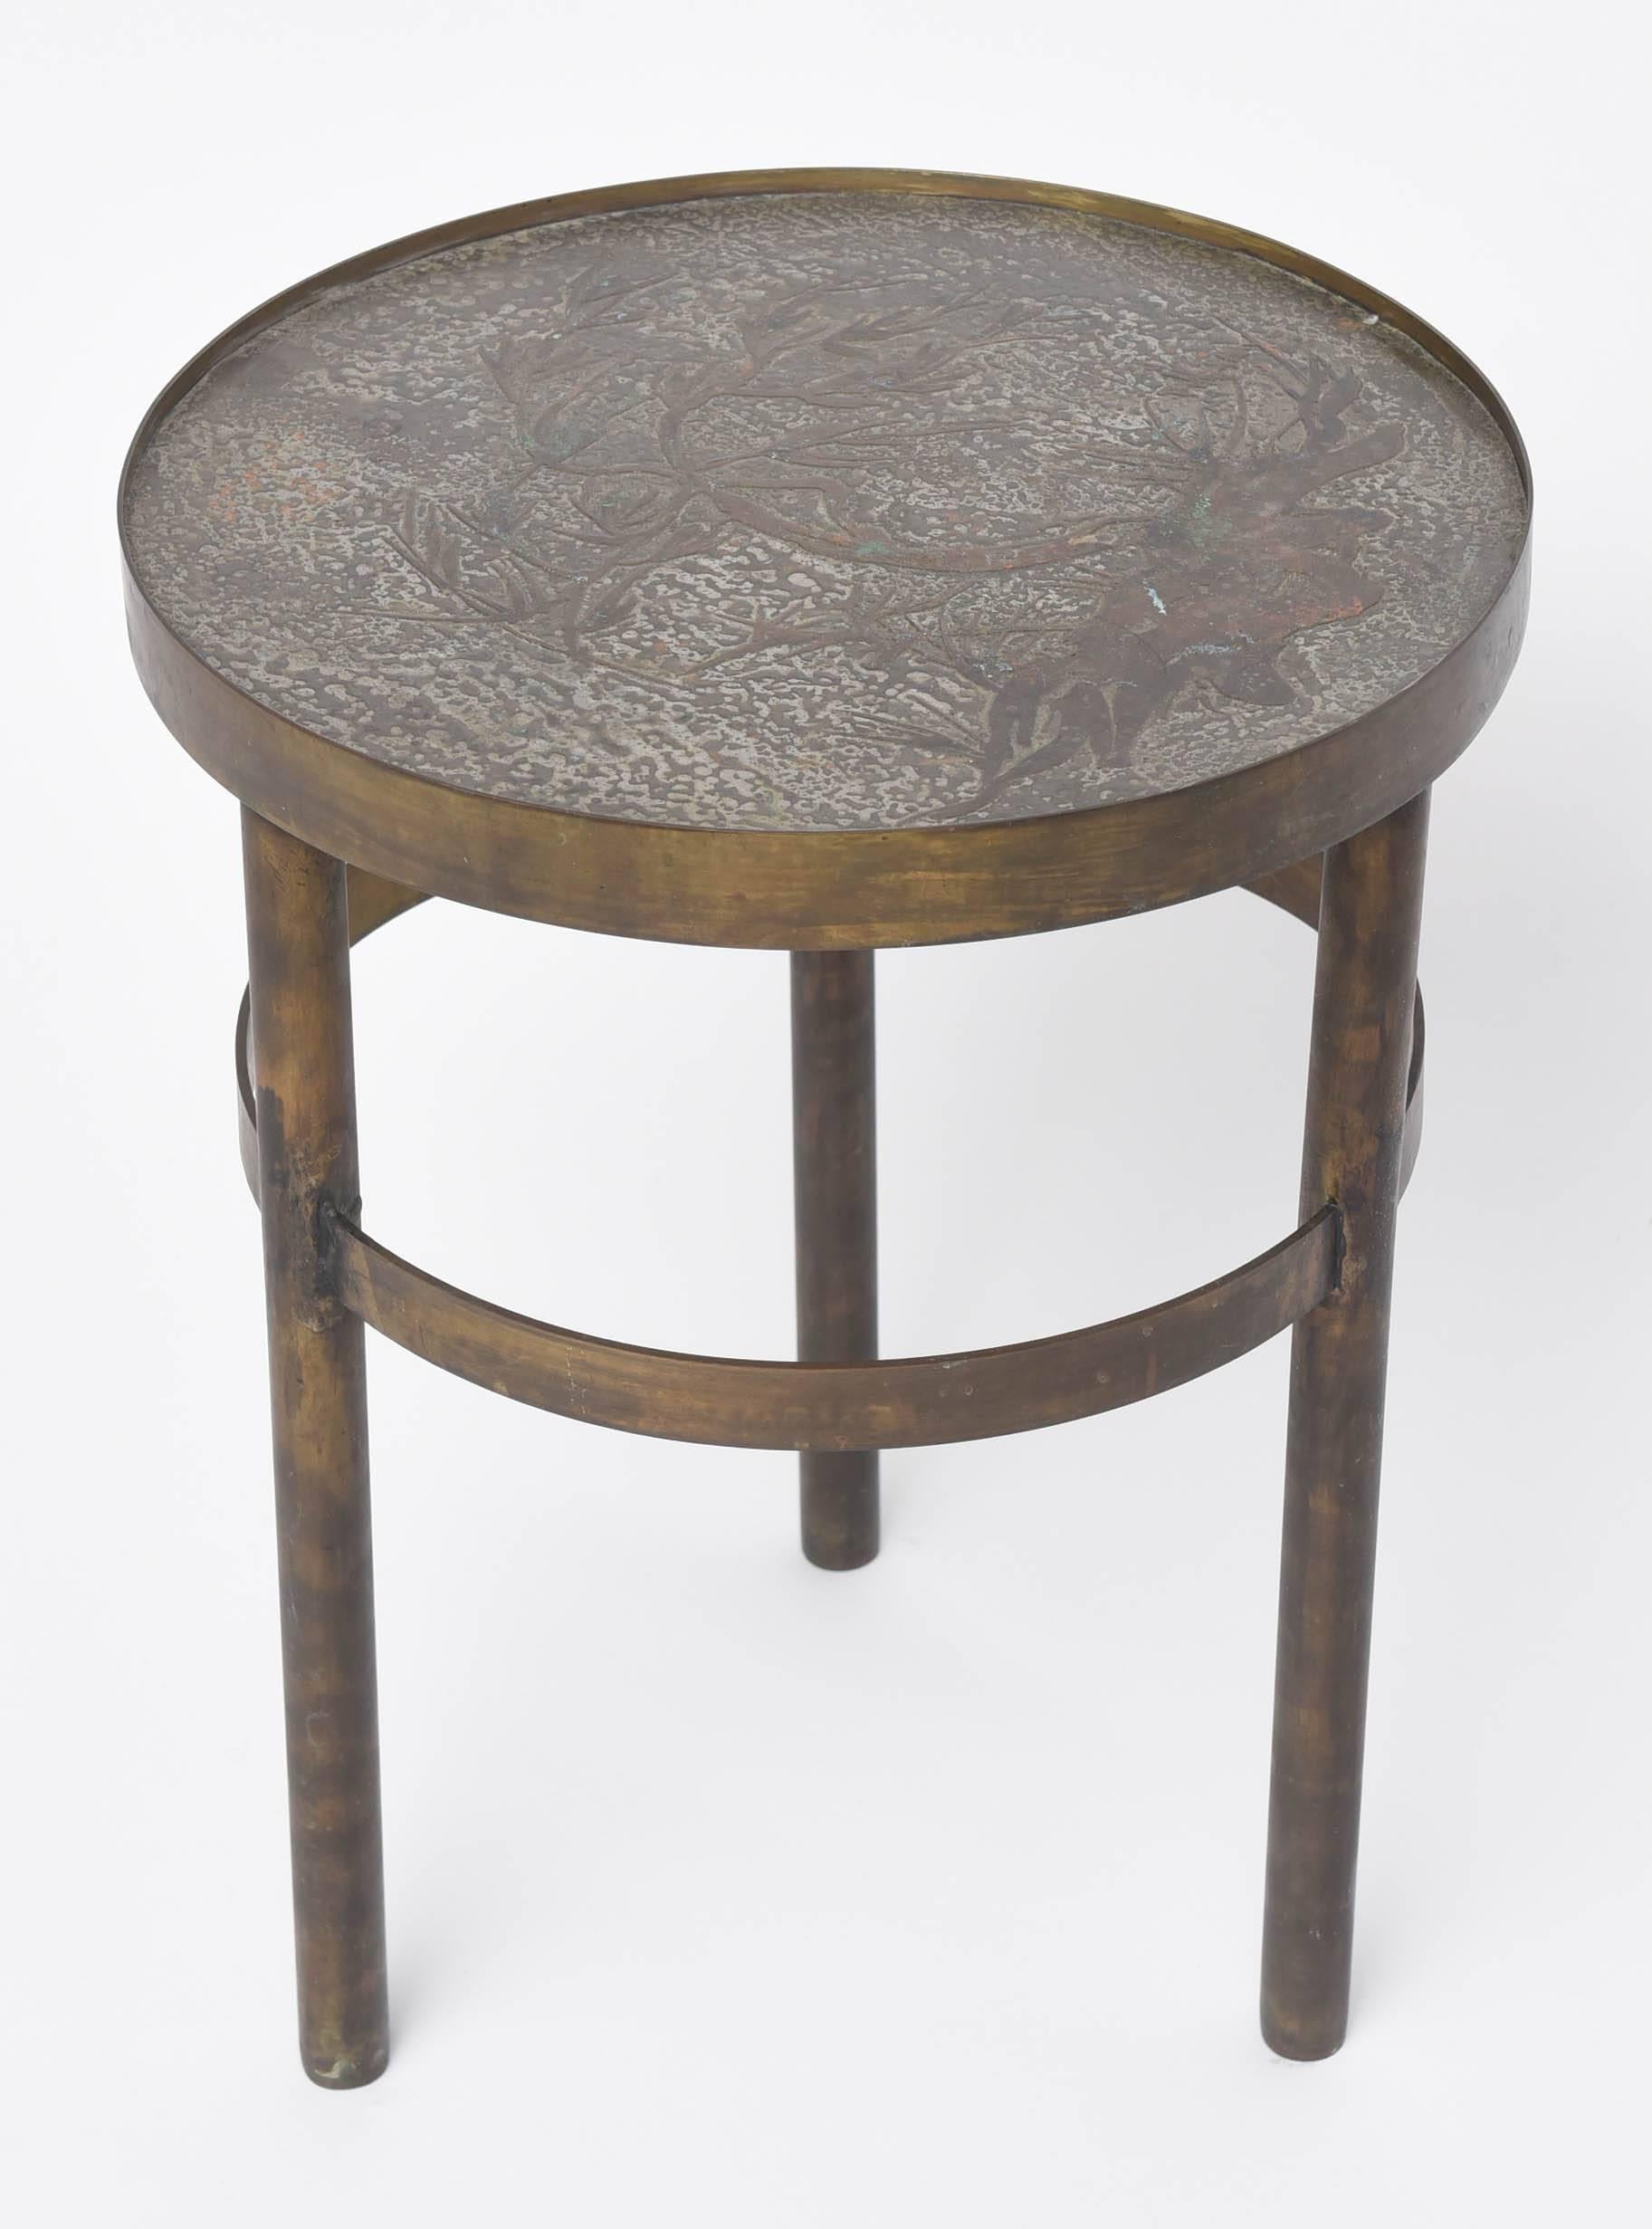 Great Laverne side table with a unique design.